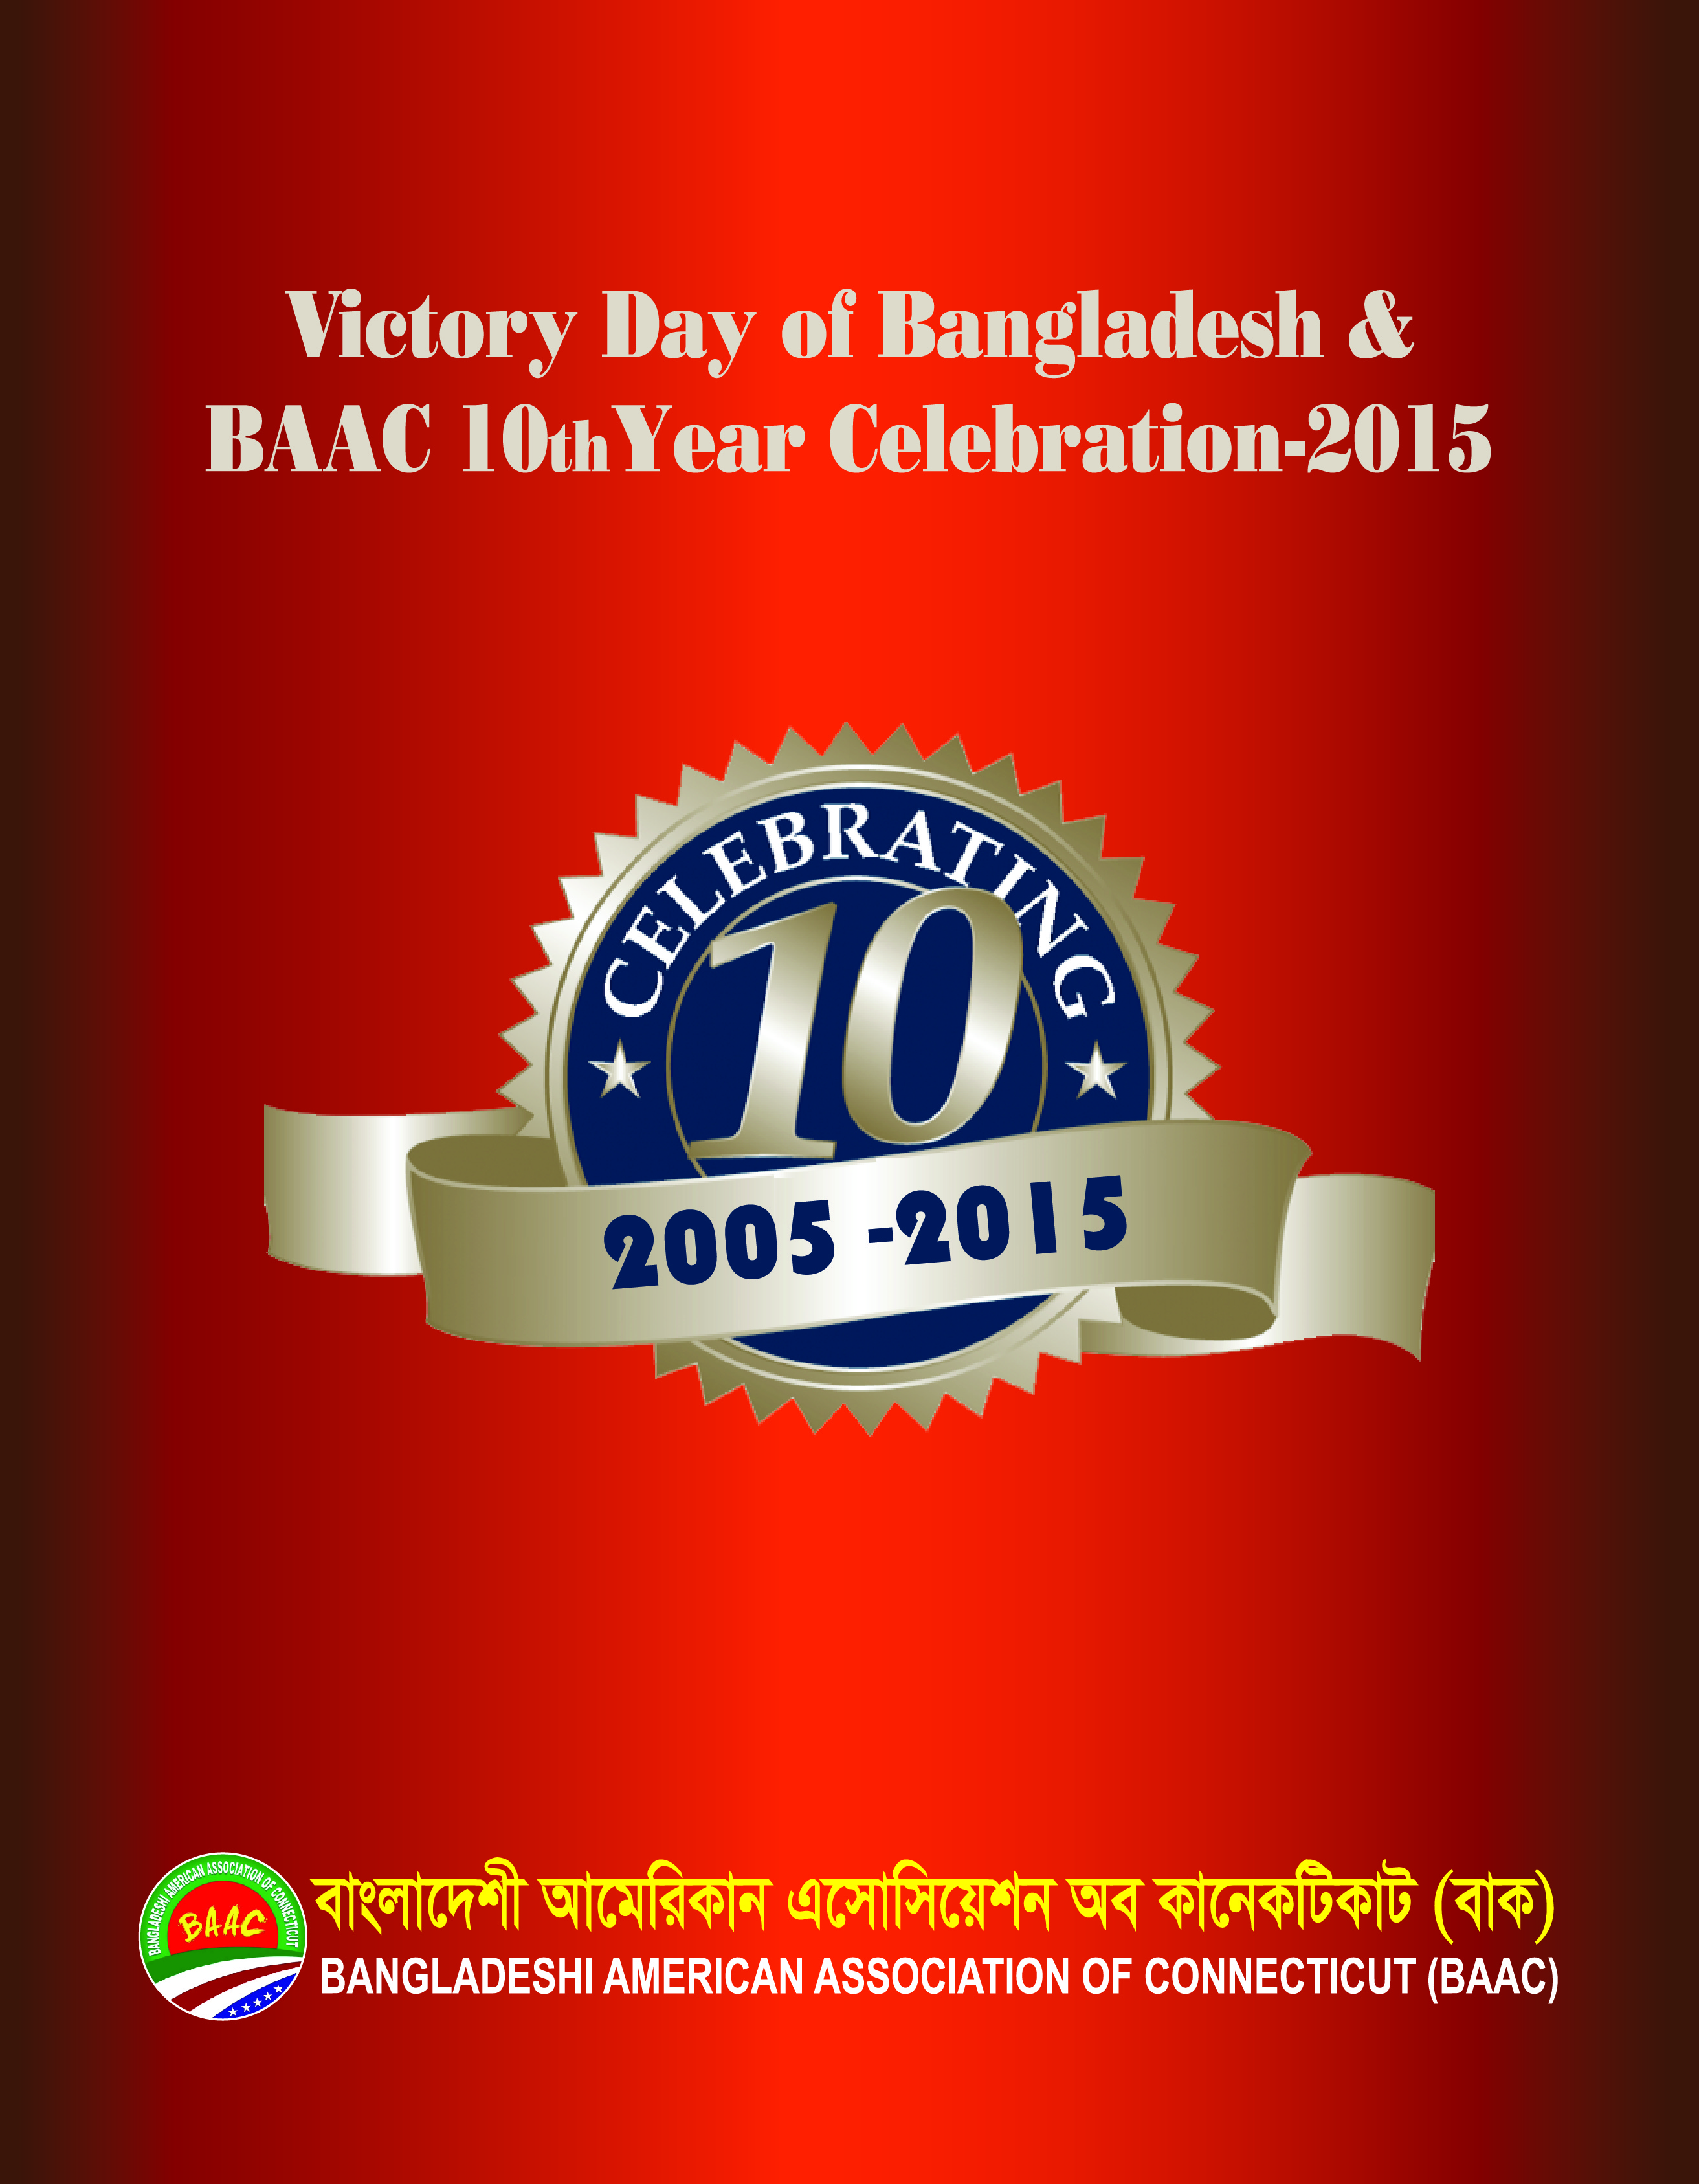 BAAC 10th Year Celebration -2015 Special Documentary